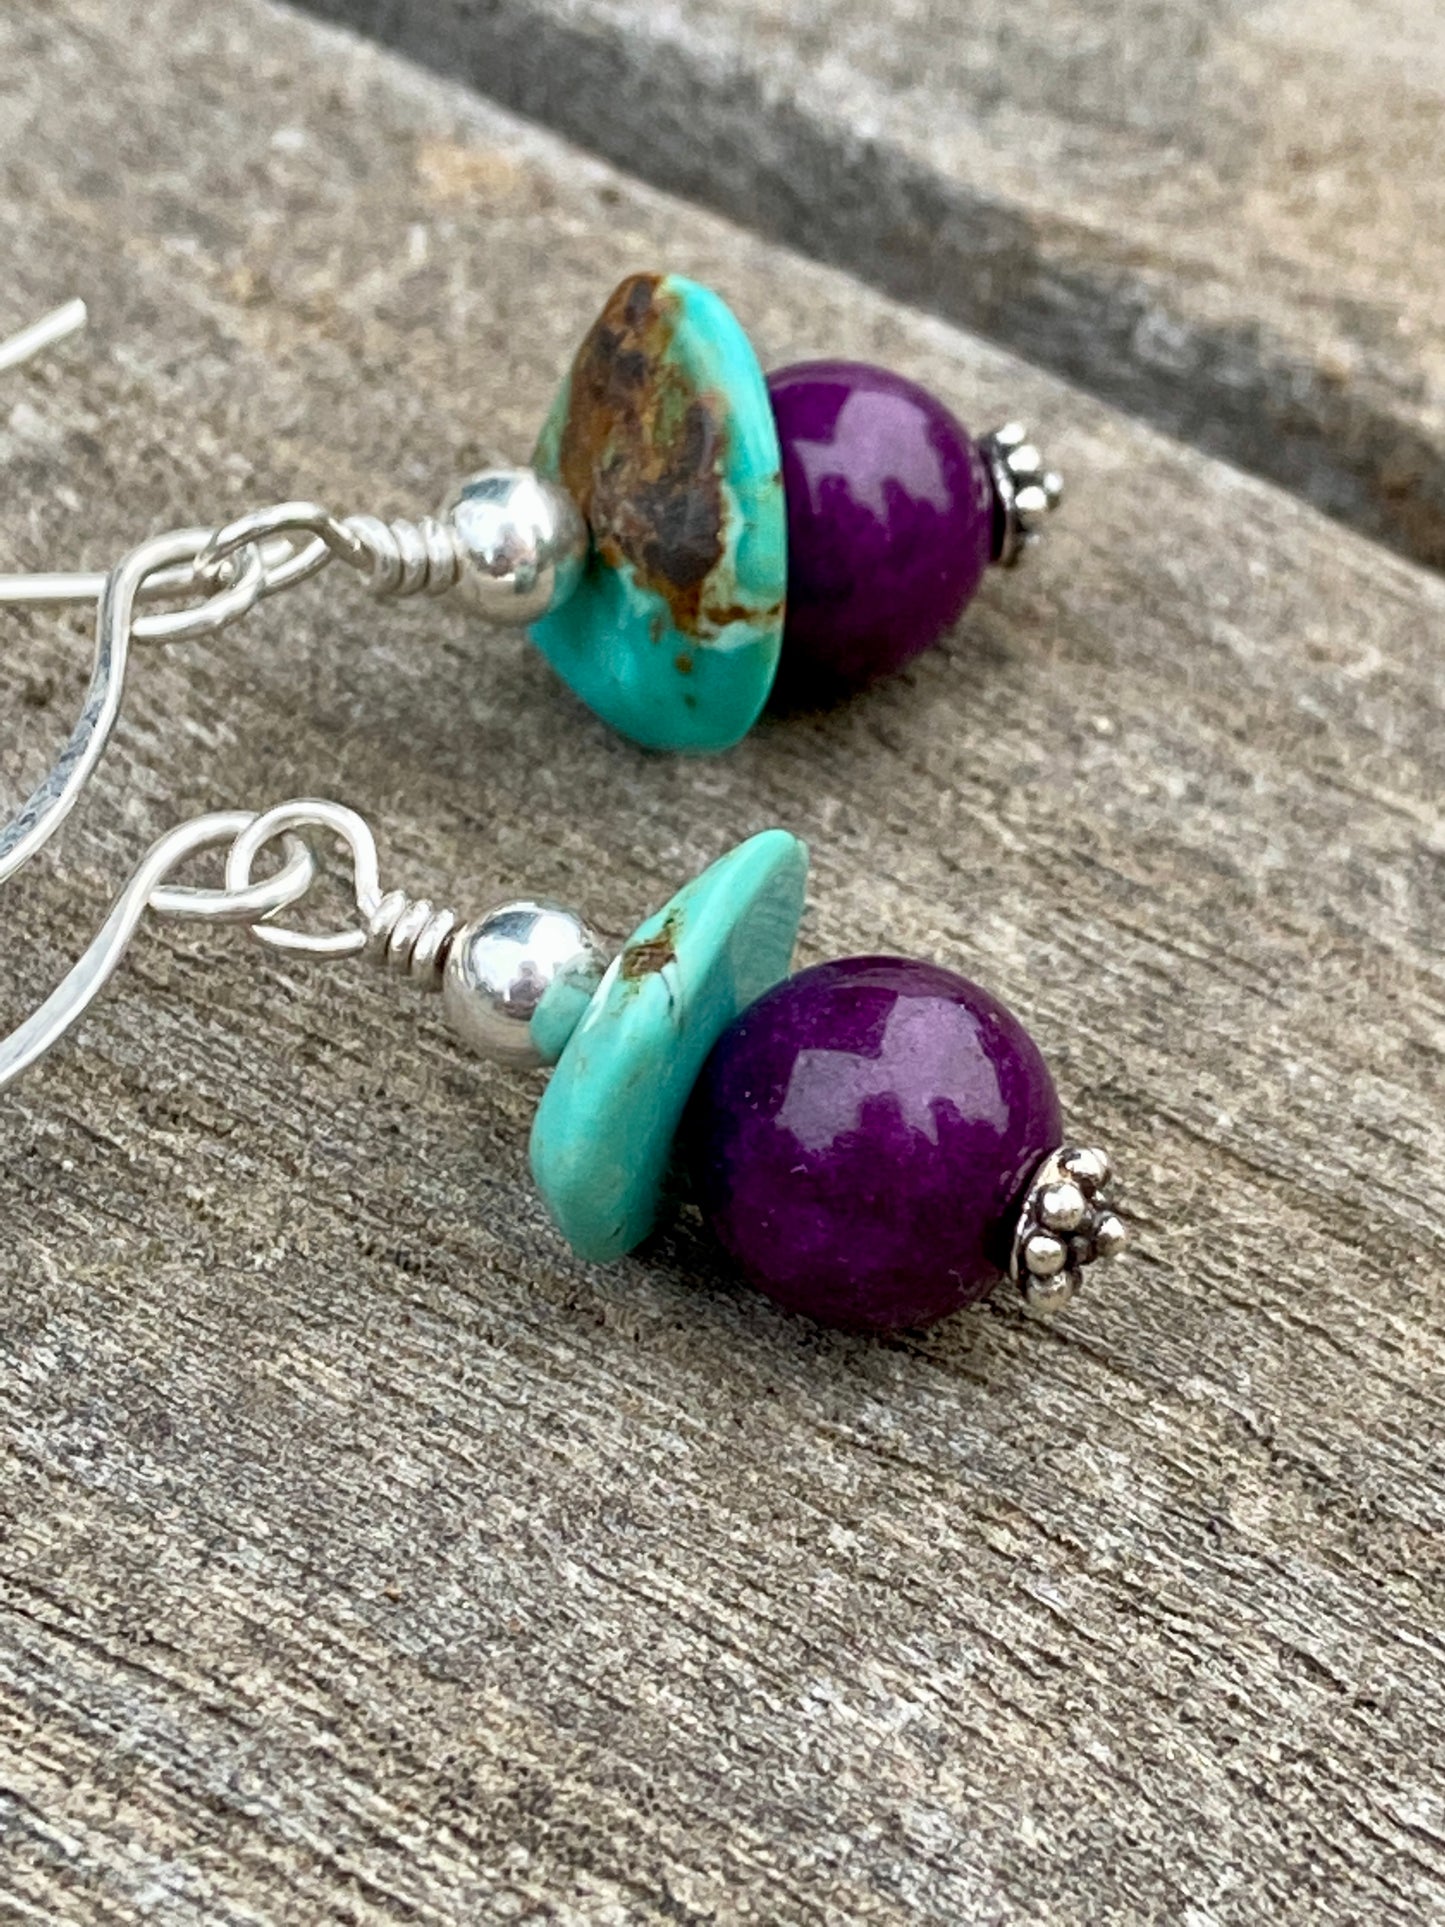 Hoop Wire Sugilite with Turquoise Earrings on Sterling Silver Wire